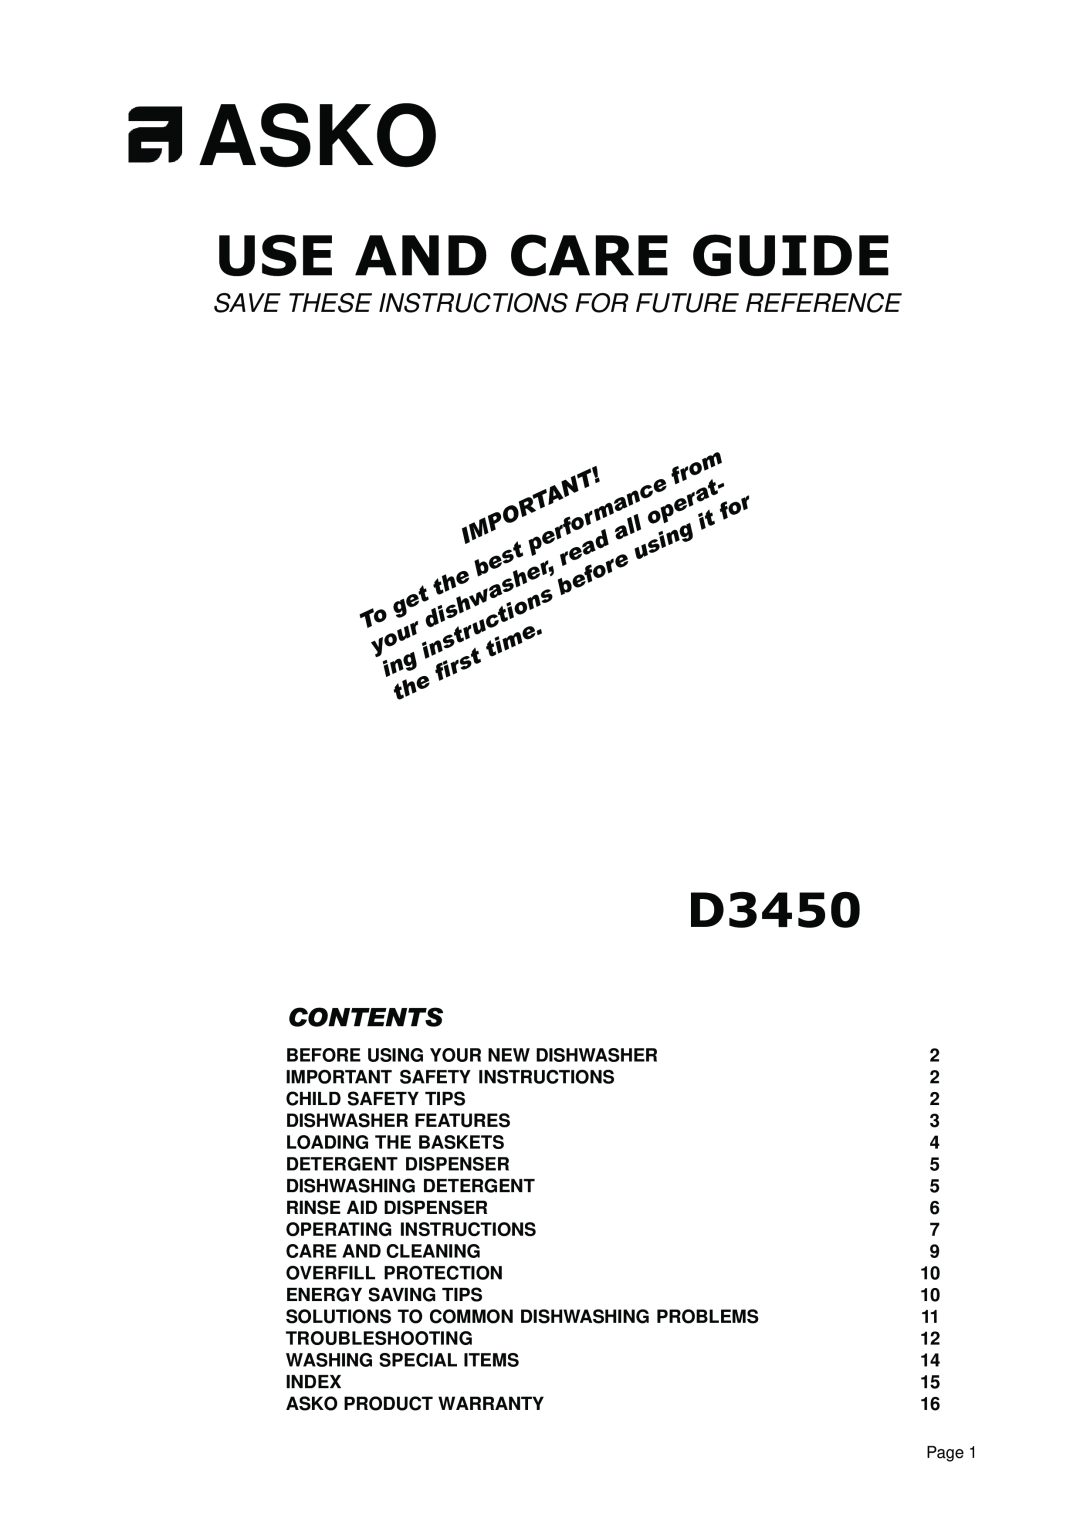 Asko D3450 important safety instructions Asko, Use And Care Guide, Save These Instructions For Future Reference, Contents 